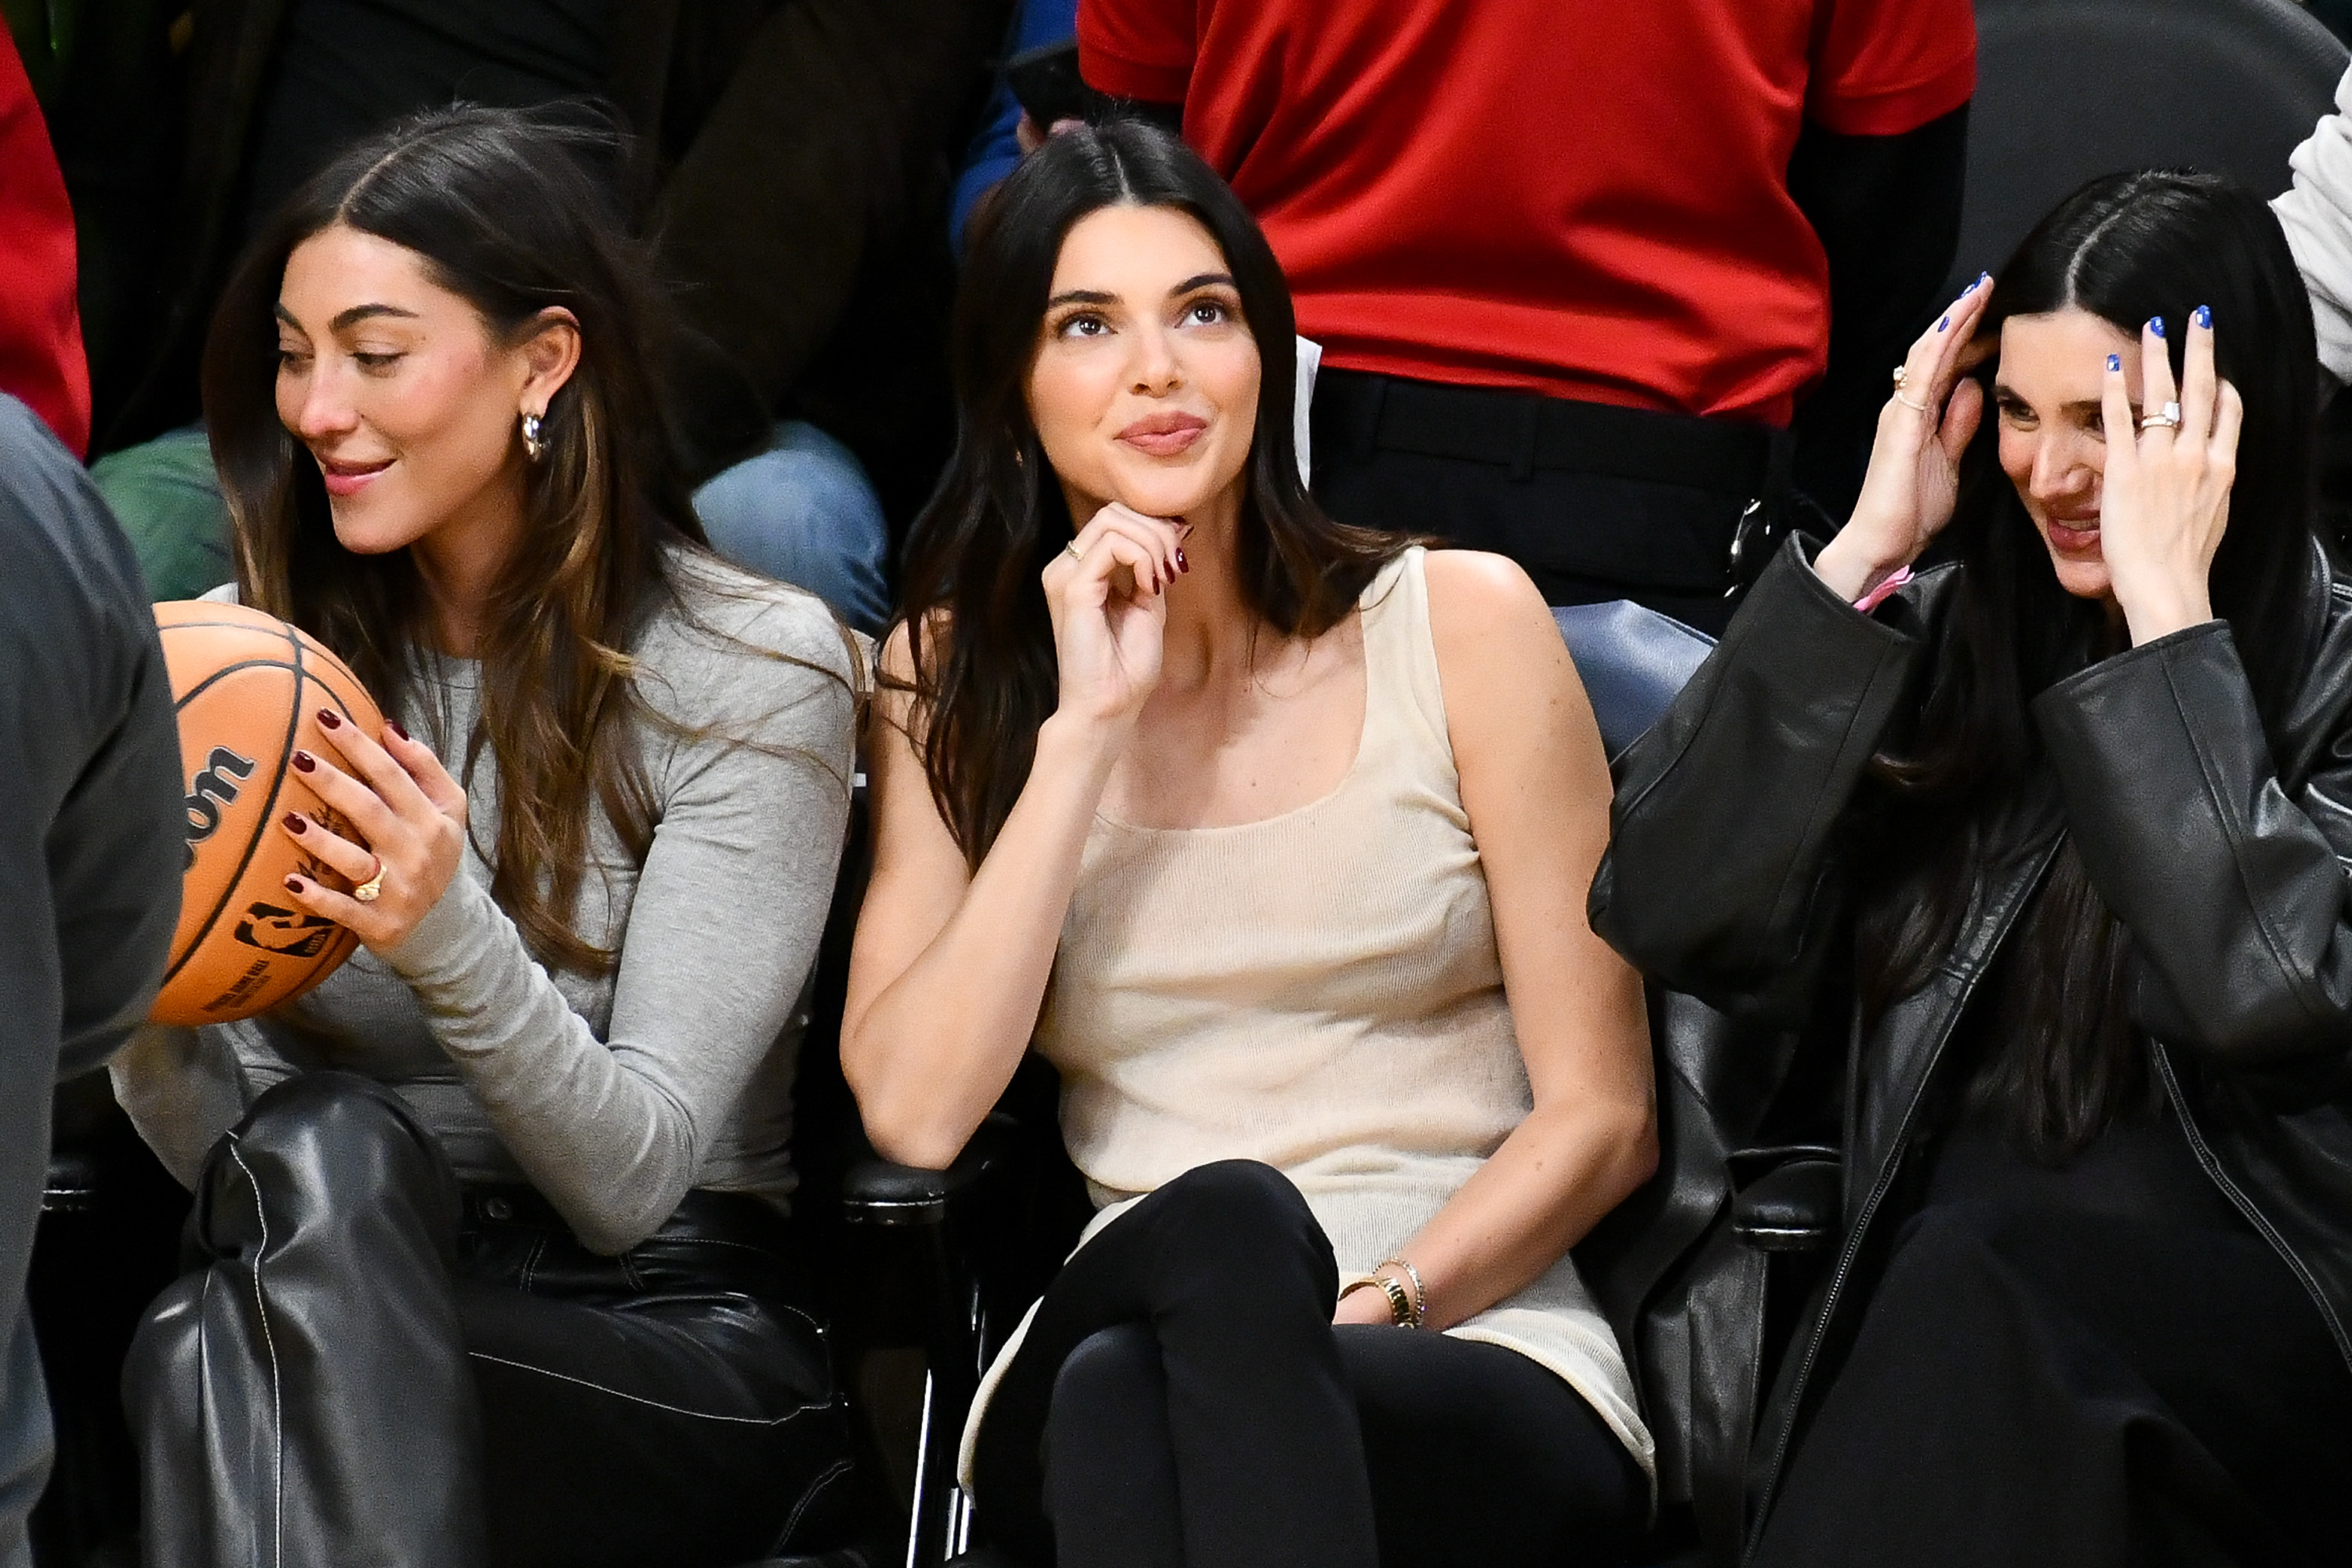 Where Kendall Jenner and Devin Booker Stand Amid Rekindled Romance